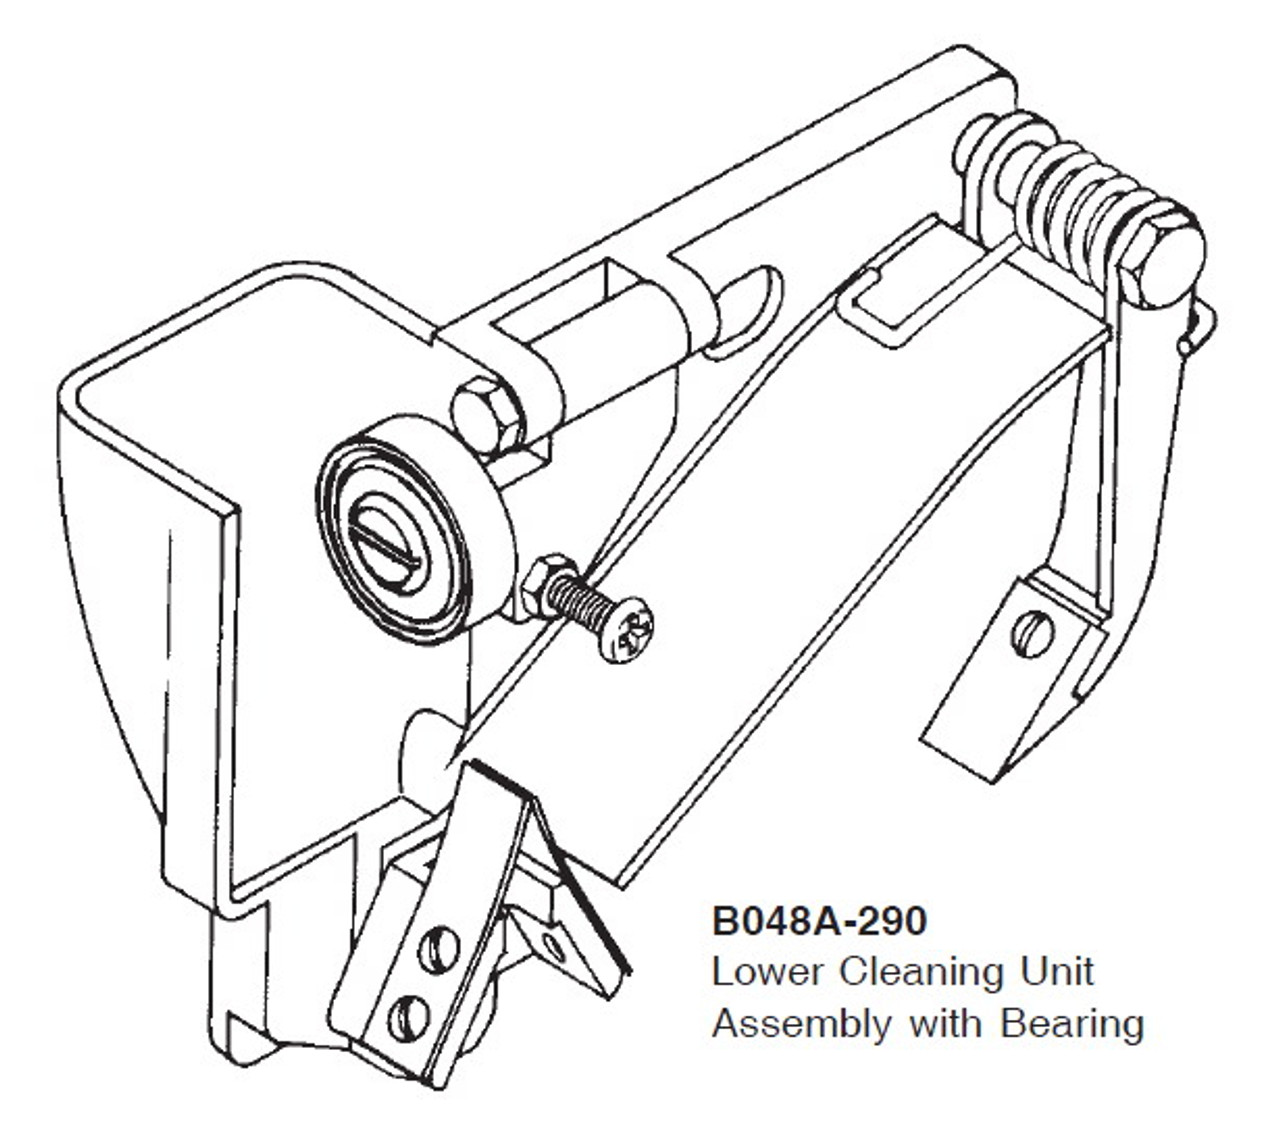 Lower Cleaning Unit Assembly with Bearing - B048A-290